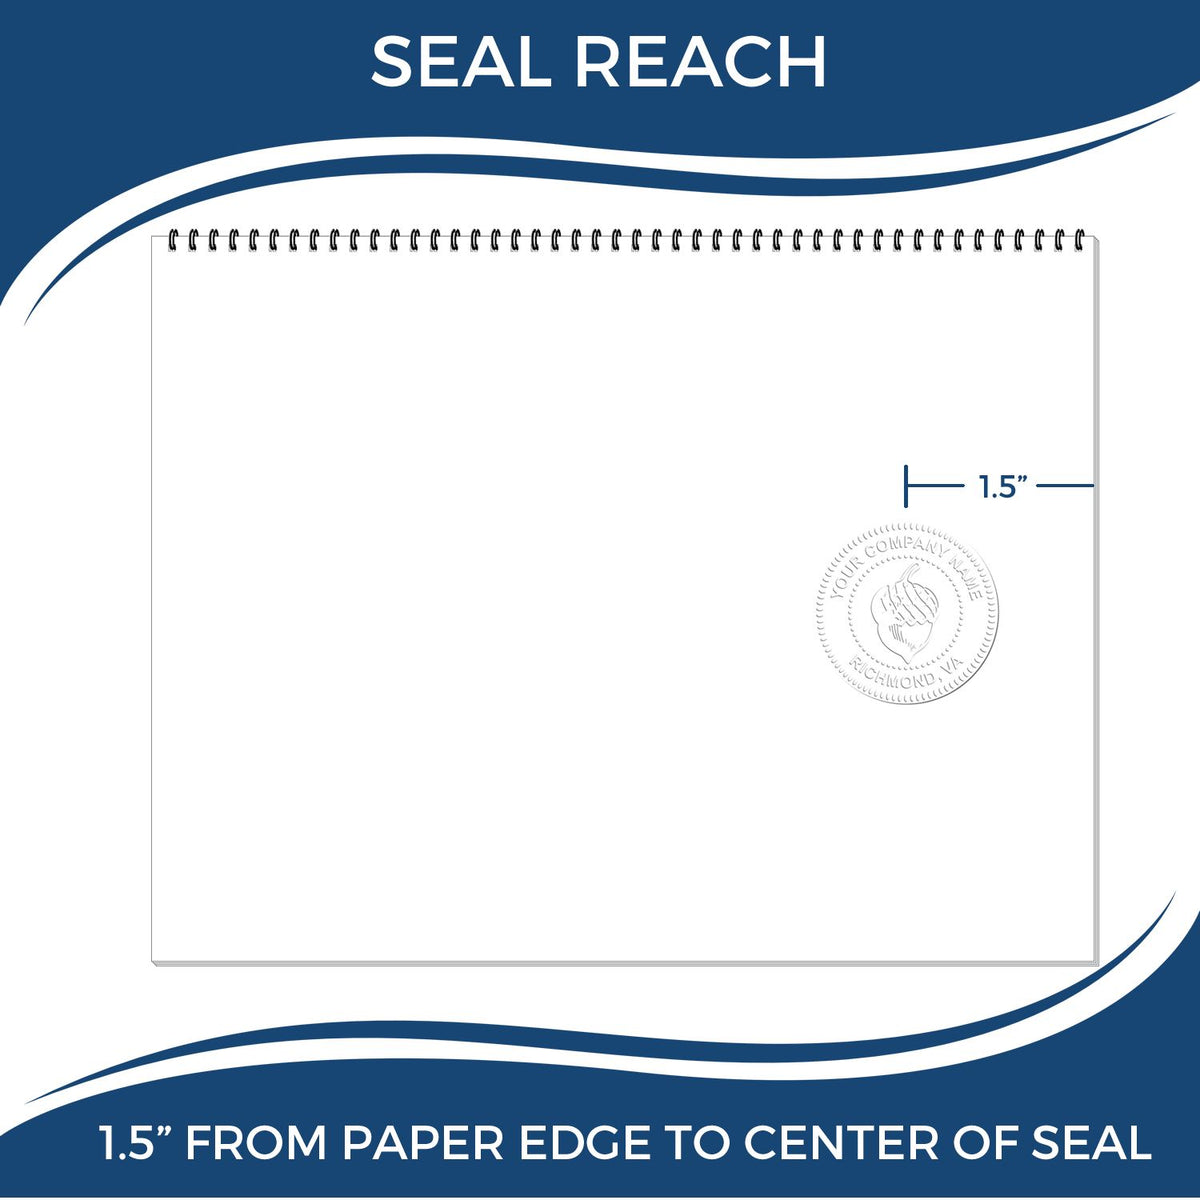 An infographic showing the seal reach which is represented by a ruler and a miniature seal image of the Hybrid Arizona Geologist Seal